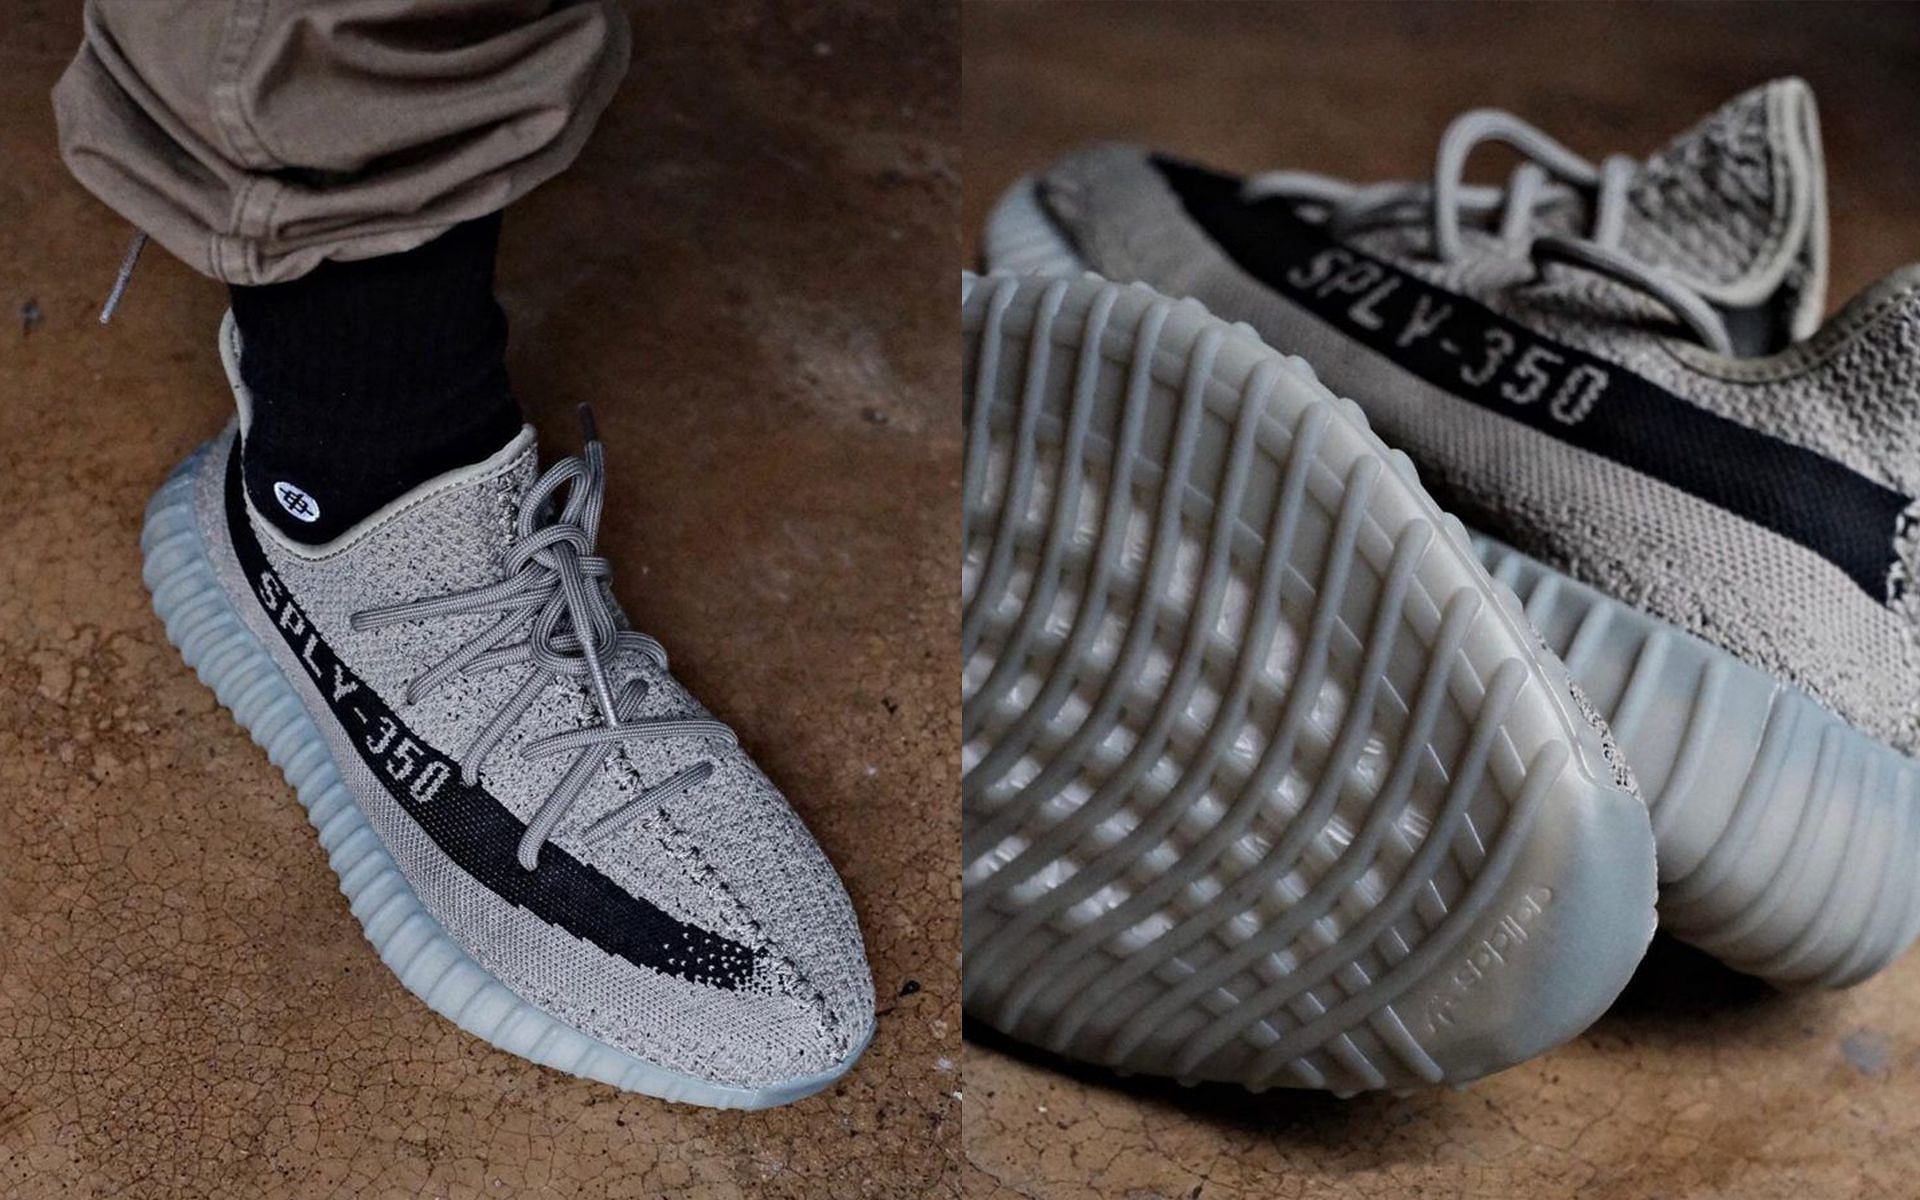 Where to buy Adidas Yeezy BOOST 350 V2 Granite shoes? Price and